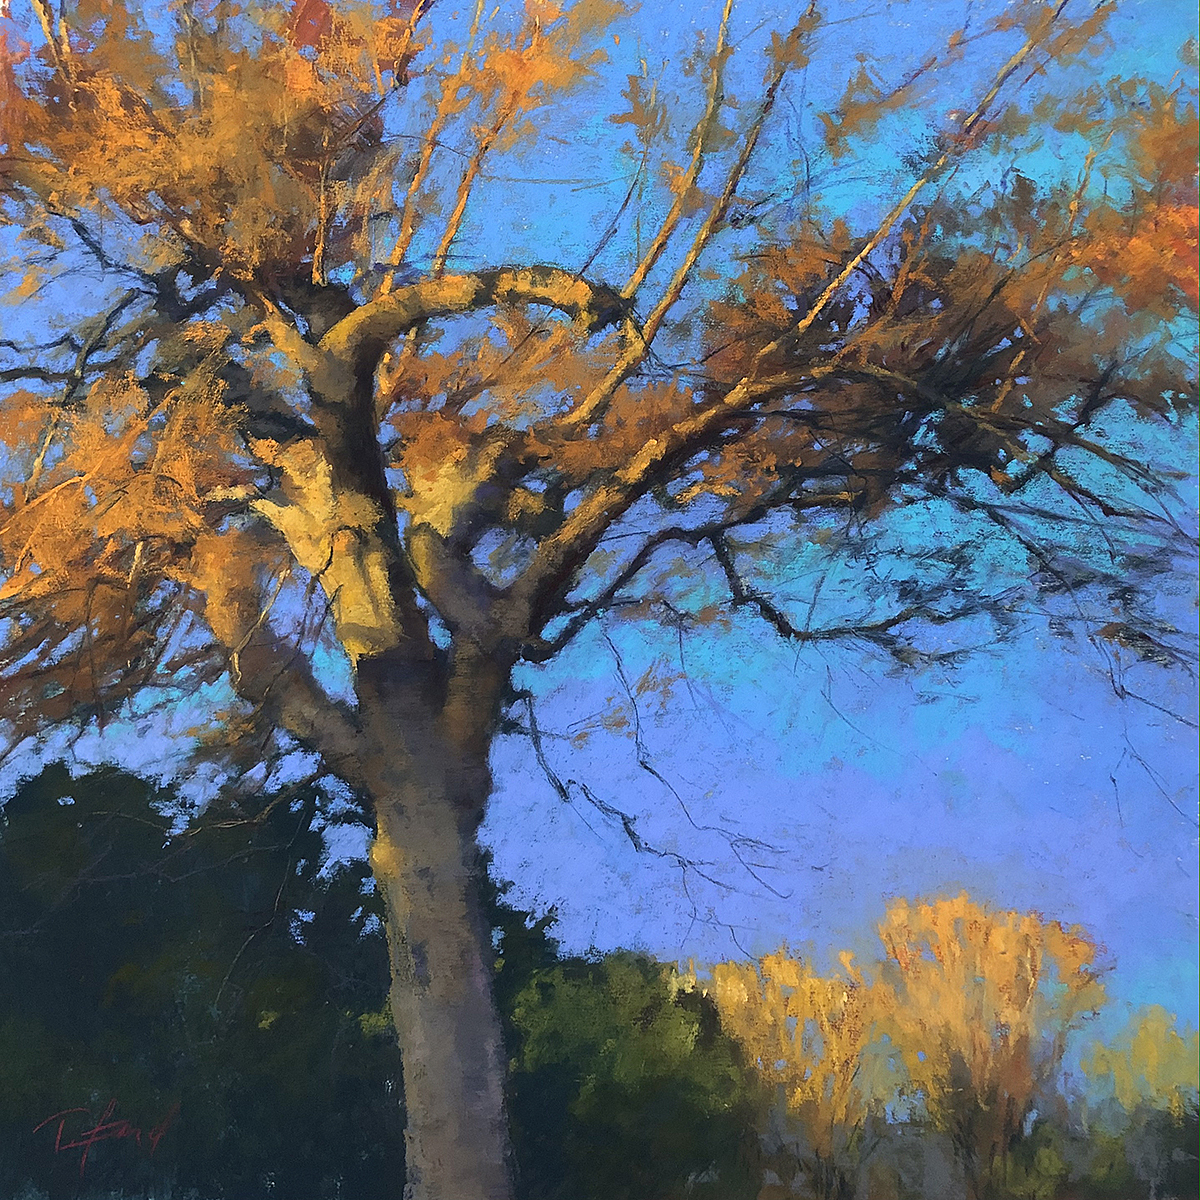 Pastel Society of America exhibition: Terri Ford, "Morning Amber," pastel, 18 x 18 in